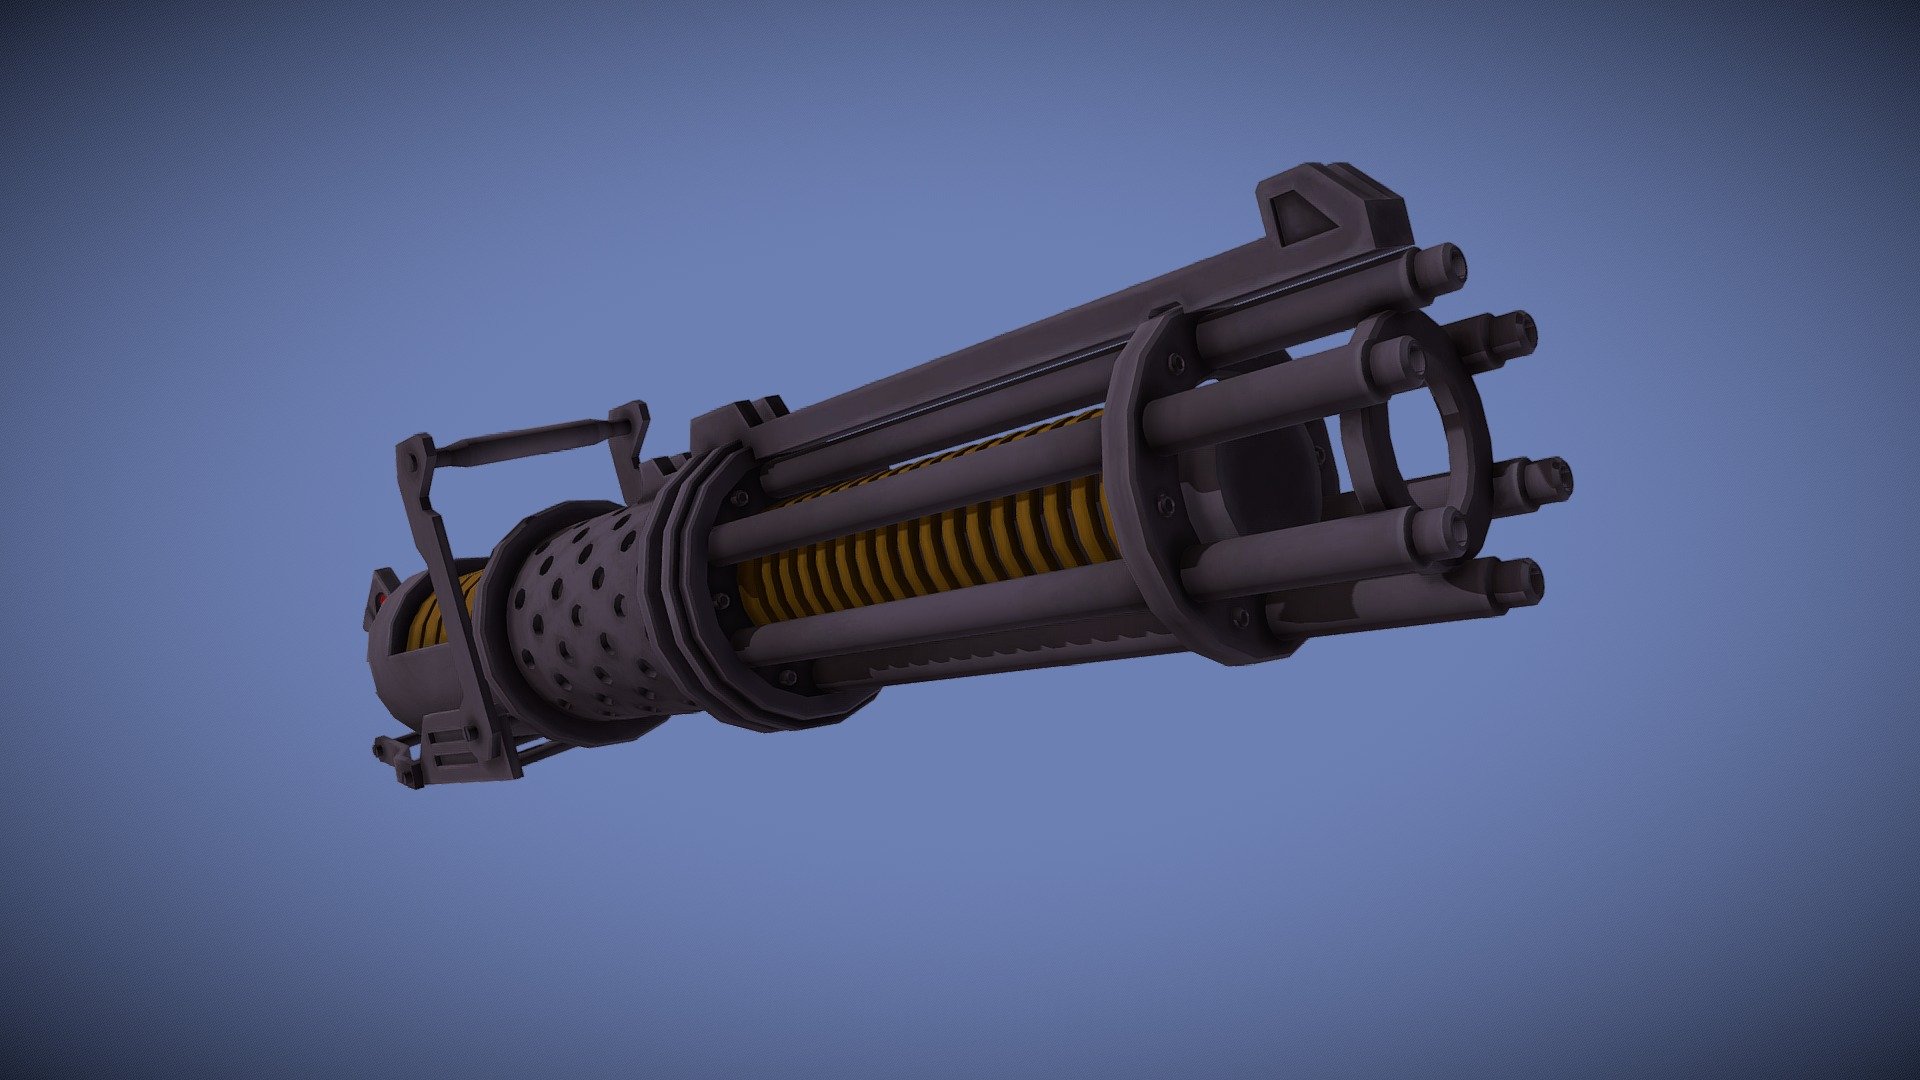 The Z-6 rotary blaster cannon was a blaster cannon used by the Galactic Republic during the Clone Wars. Later, during the reign of the Galactic Empire, these weapons were used by both the Imperial Army's Heavy Weapons Stormtroopers and Rebel Alliance's Heavy Soldiers during the Galactic Civil War 3d model